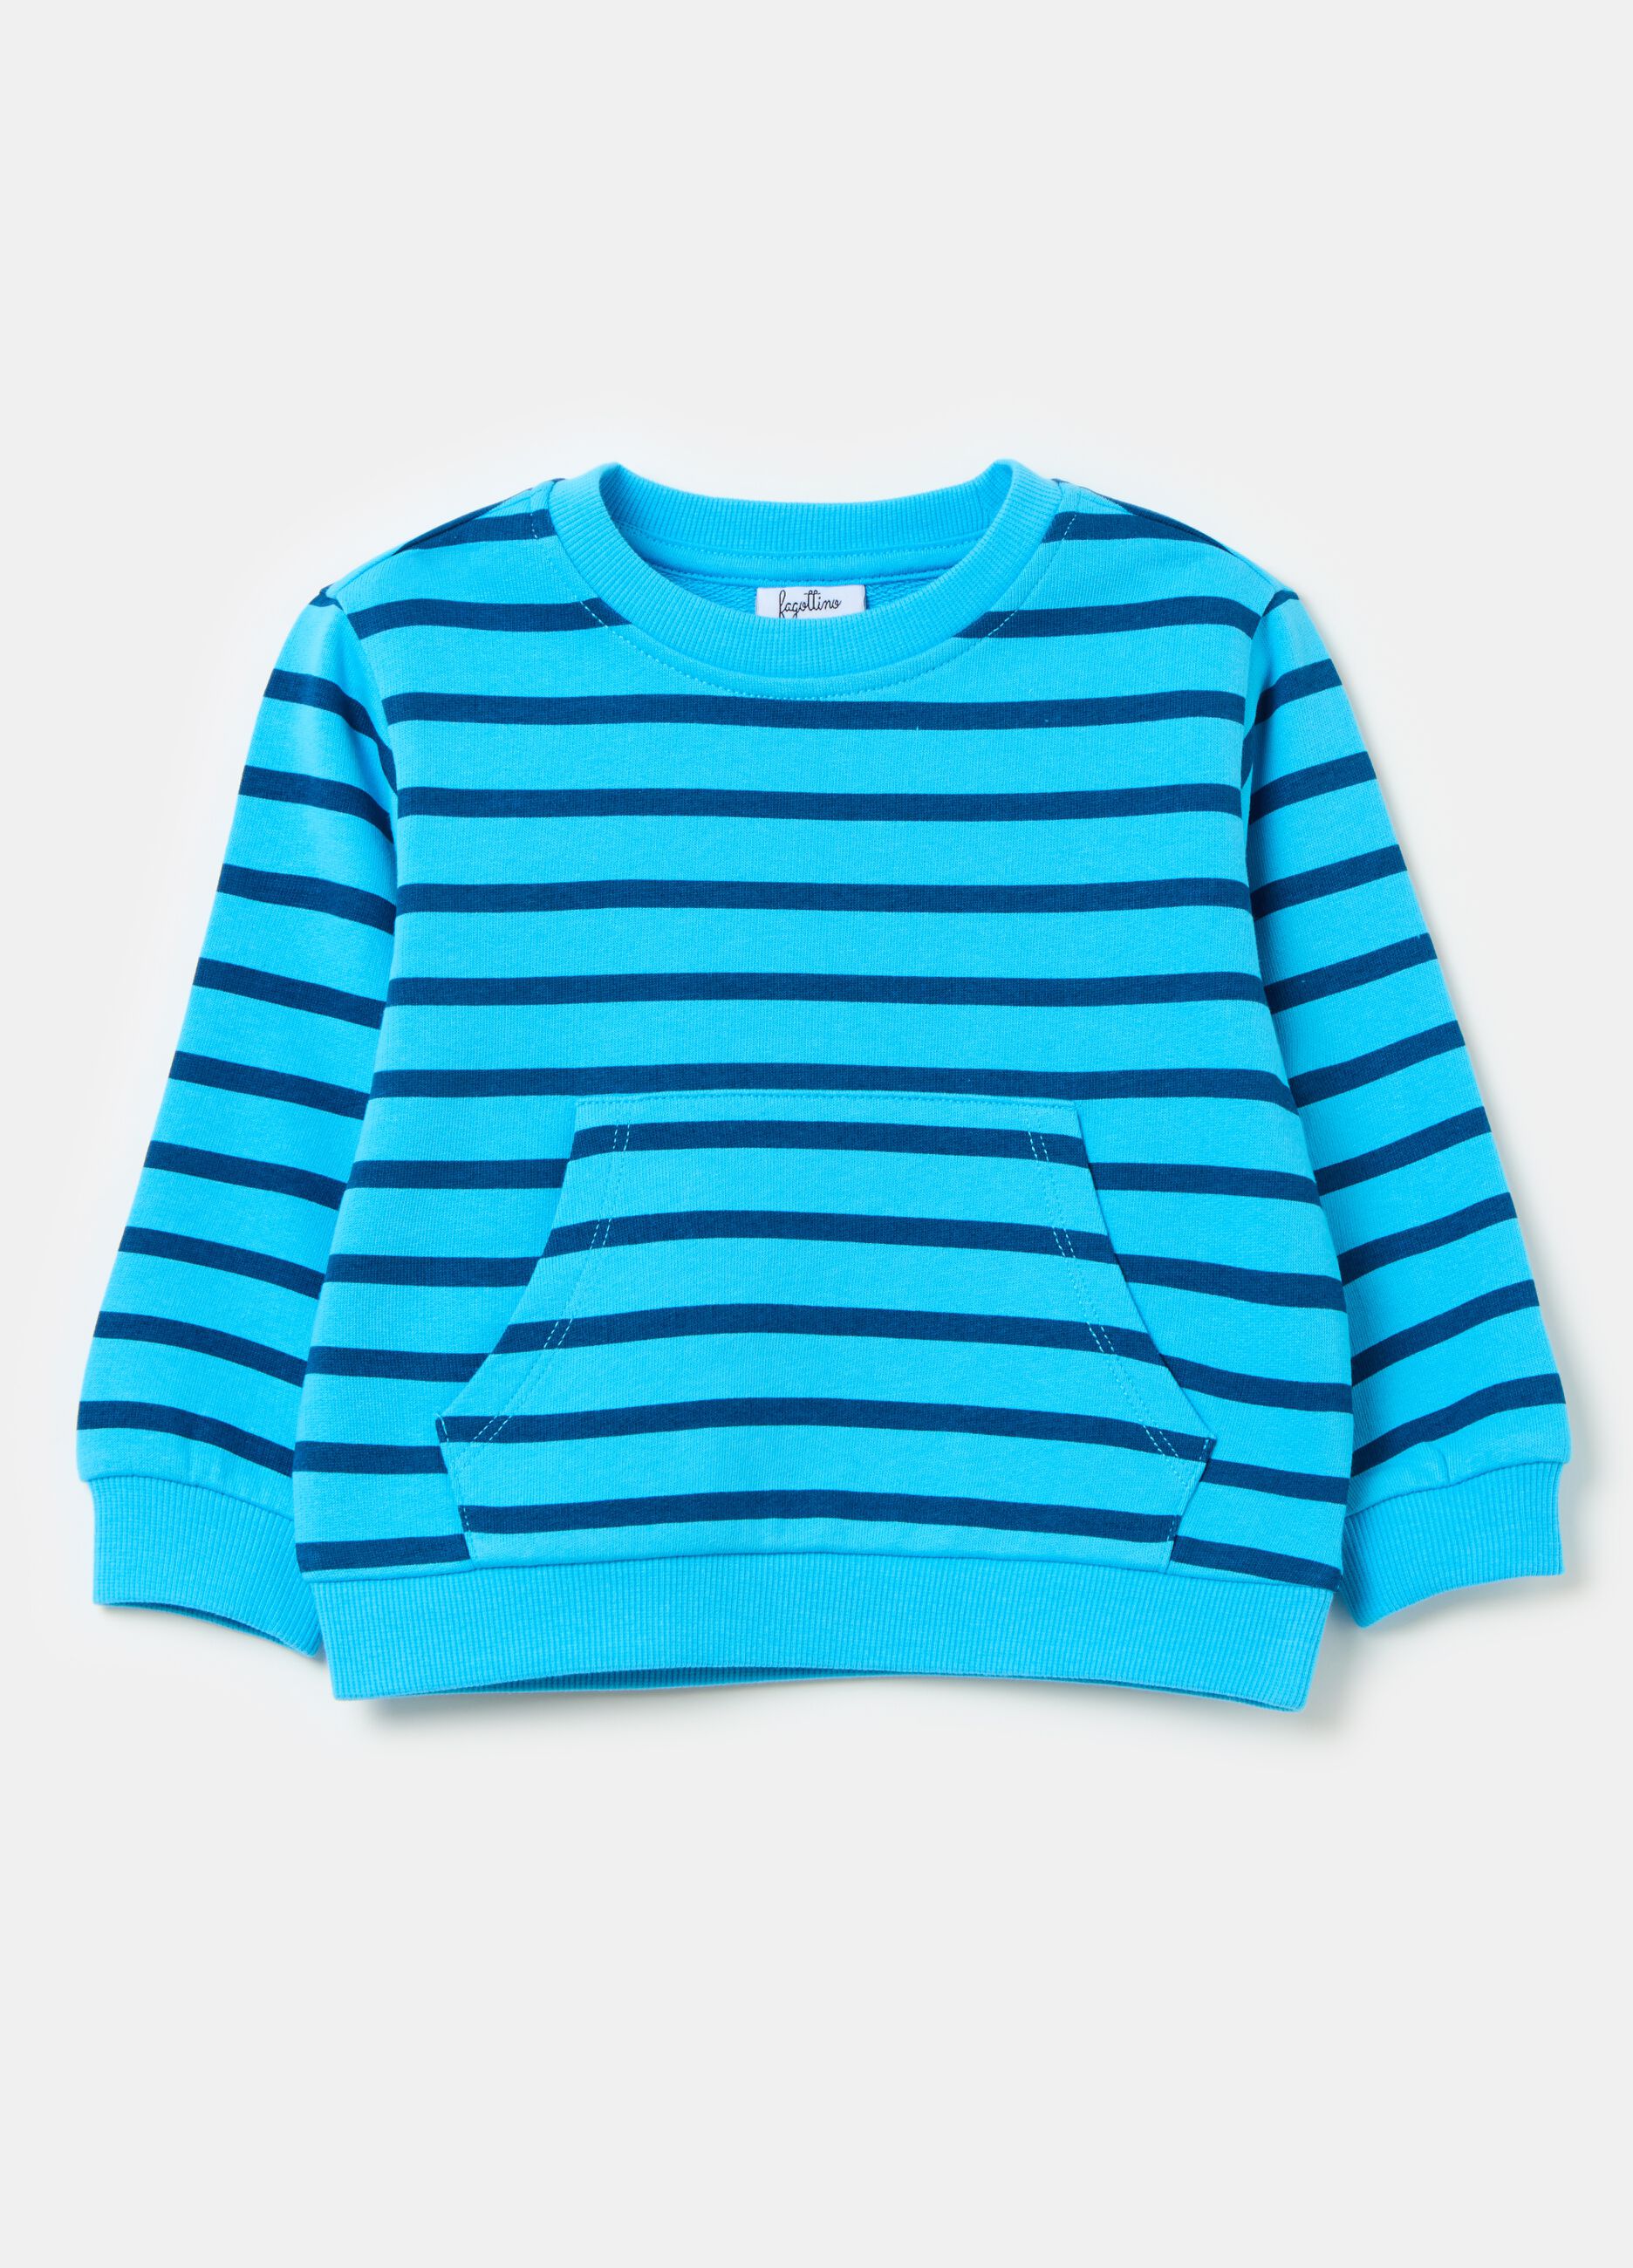 Sweatshirt in French terry with striped pattern